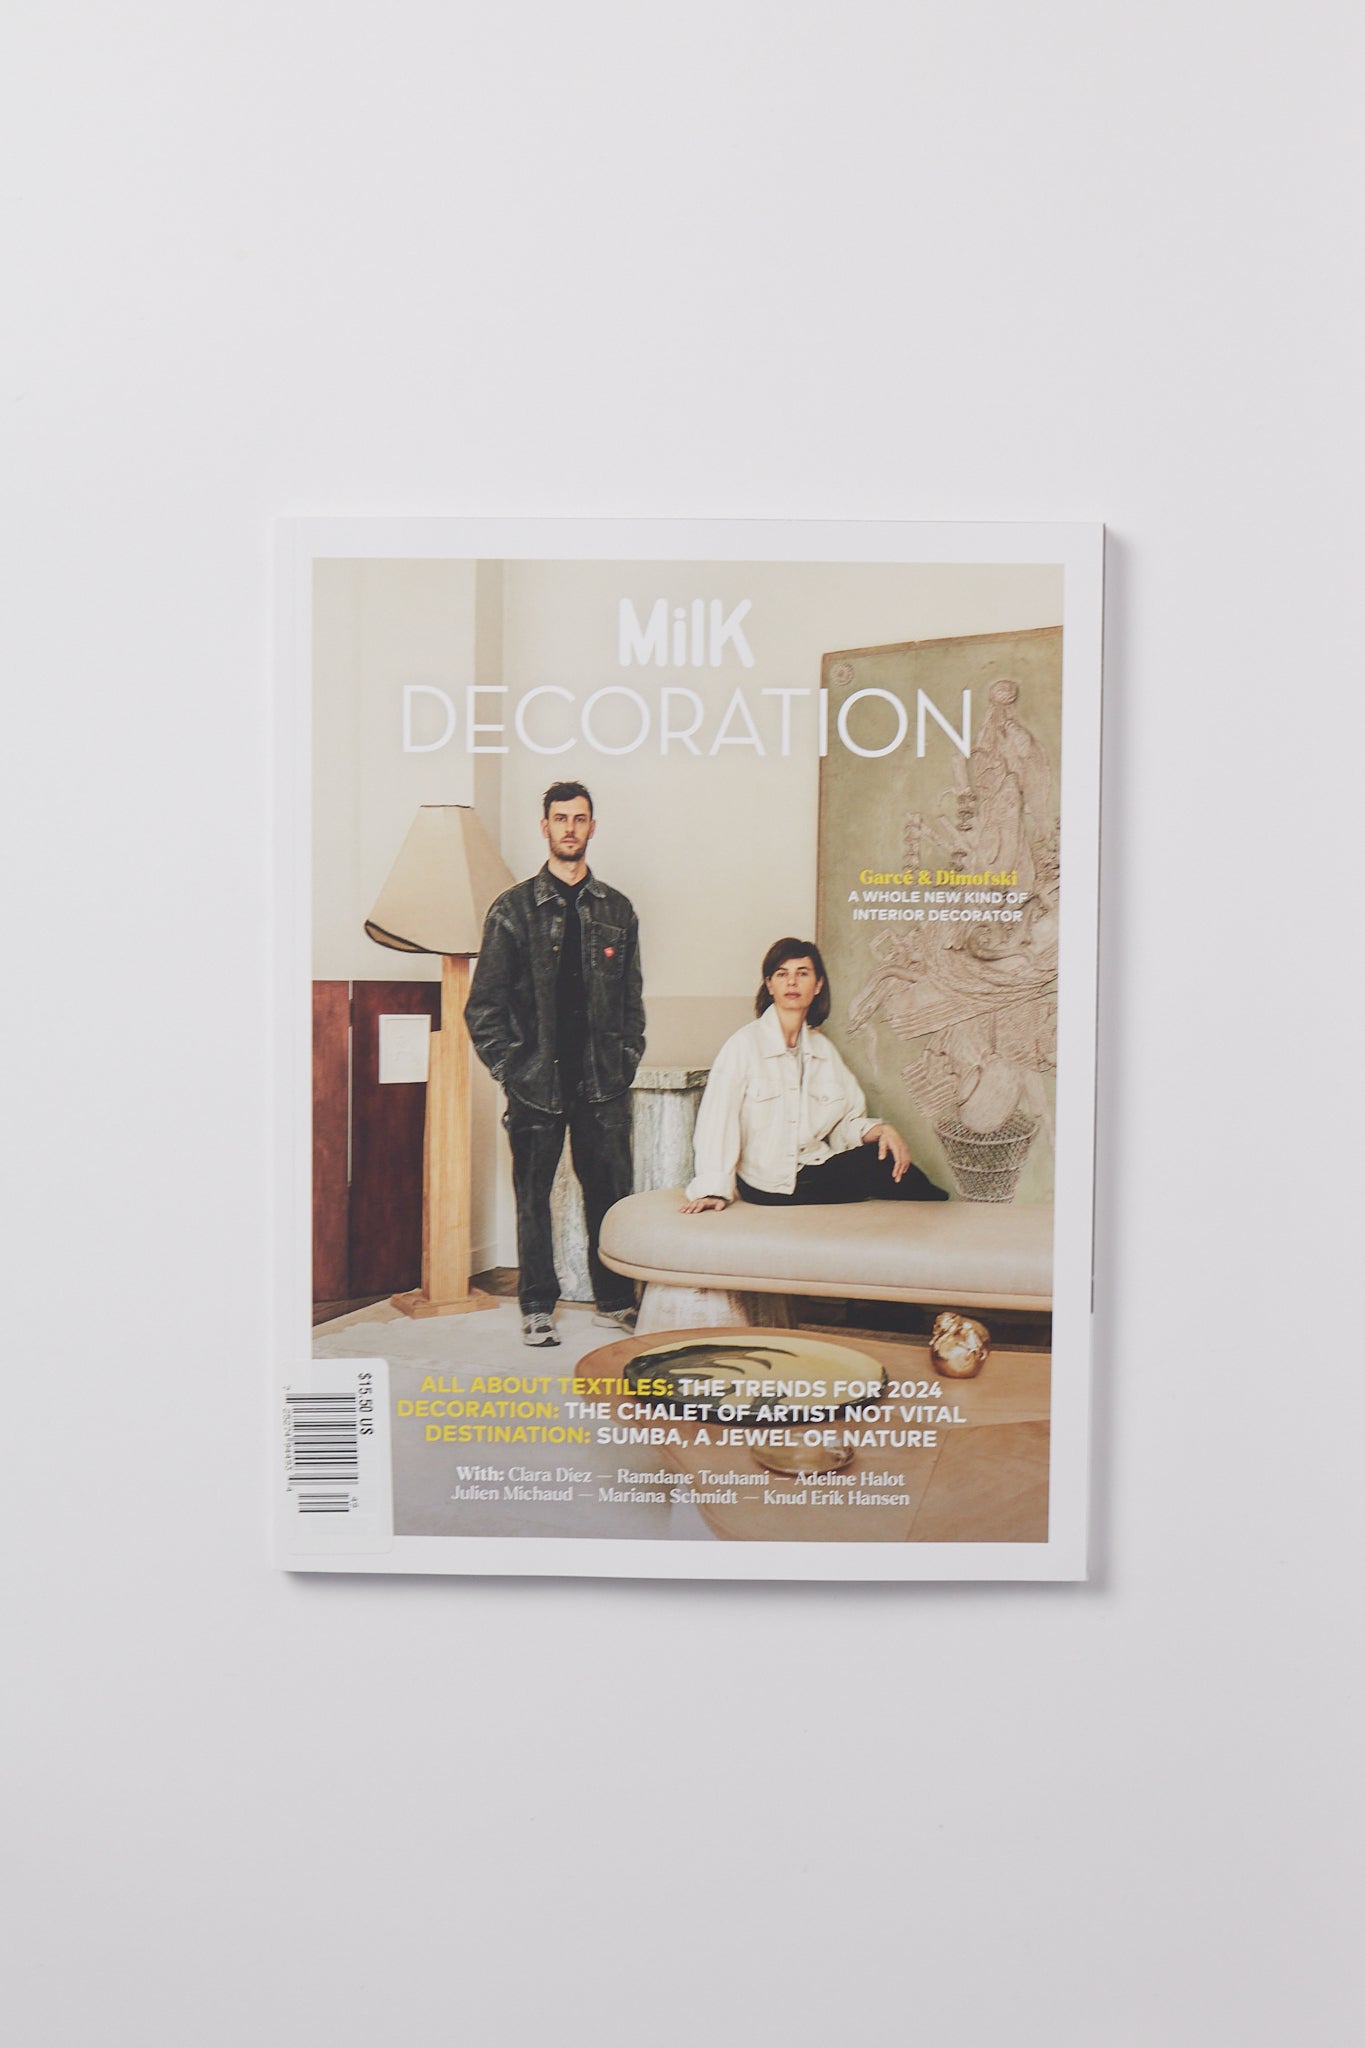 Milk Decoration Milk Decoration Magazine No. 49, curated by Shop Sommer in San Francisco.